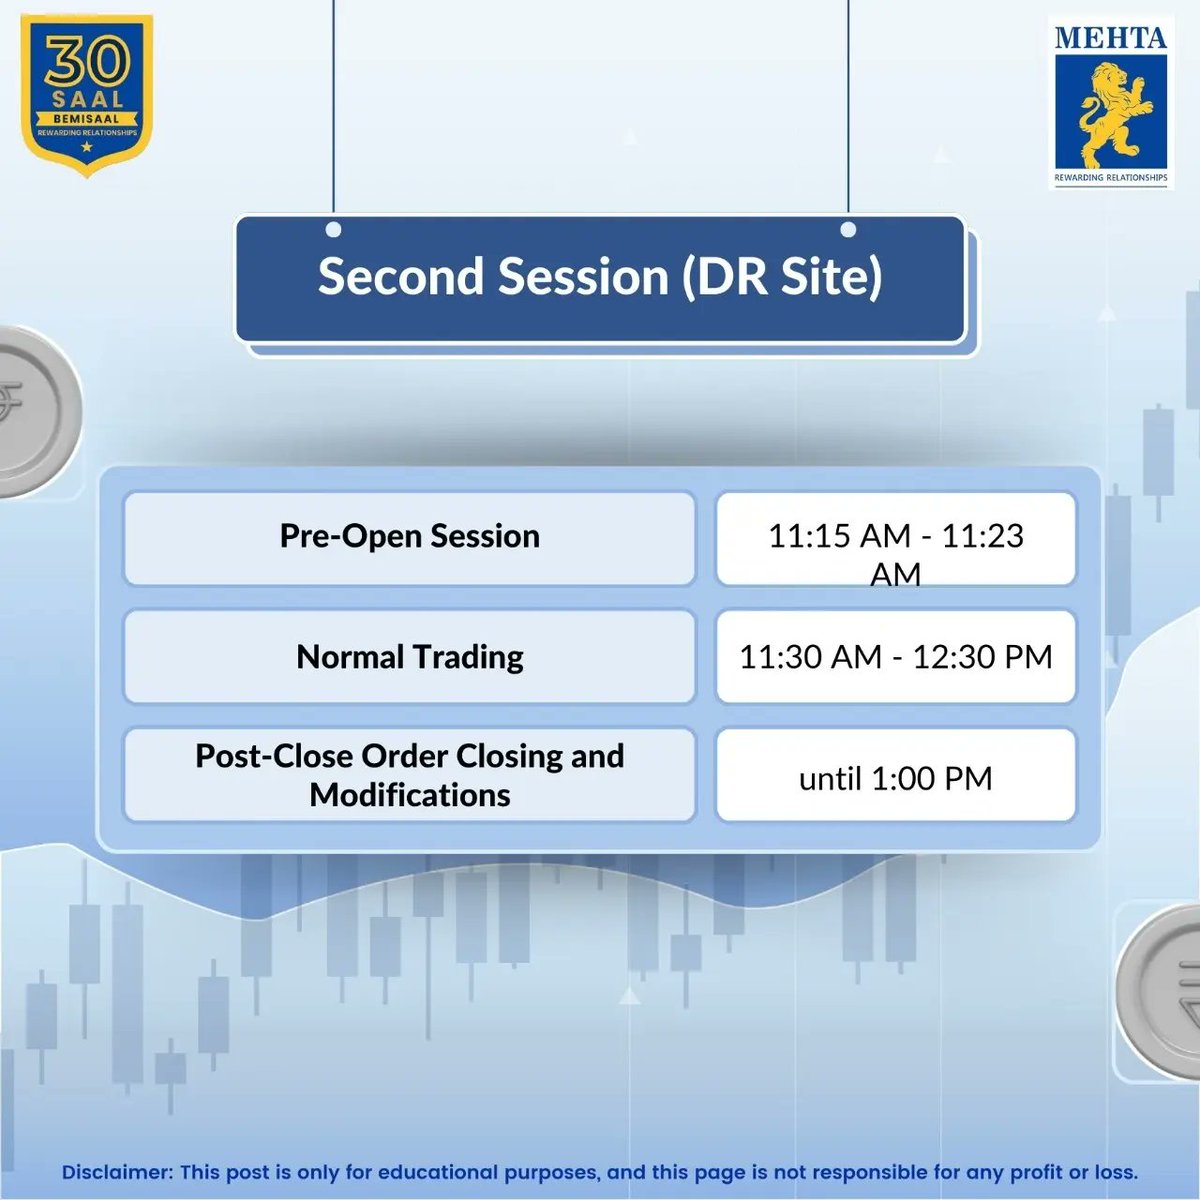 Session Alert: Special Market Trading Session by BSE and NSE on 18th May 2024
.
.
#mehtaequities #investmentopportunities #investmentstrategies #tradingsession #bseindia #nseindia #30saalbemisaal